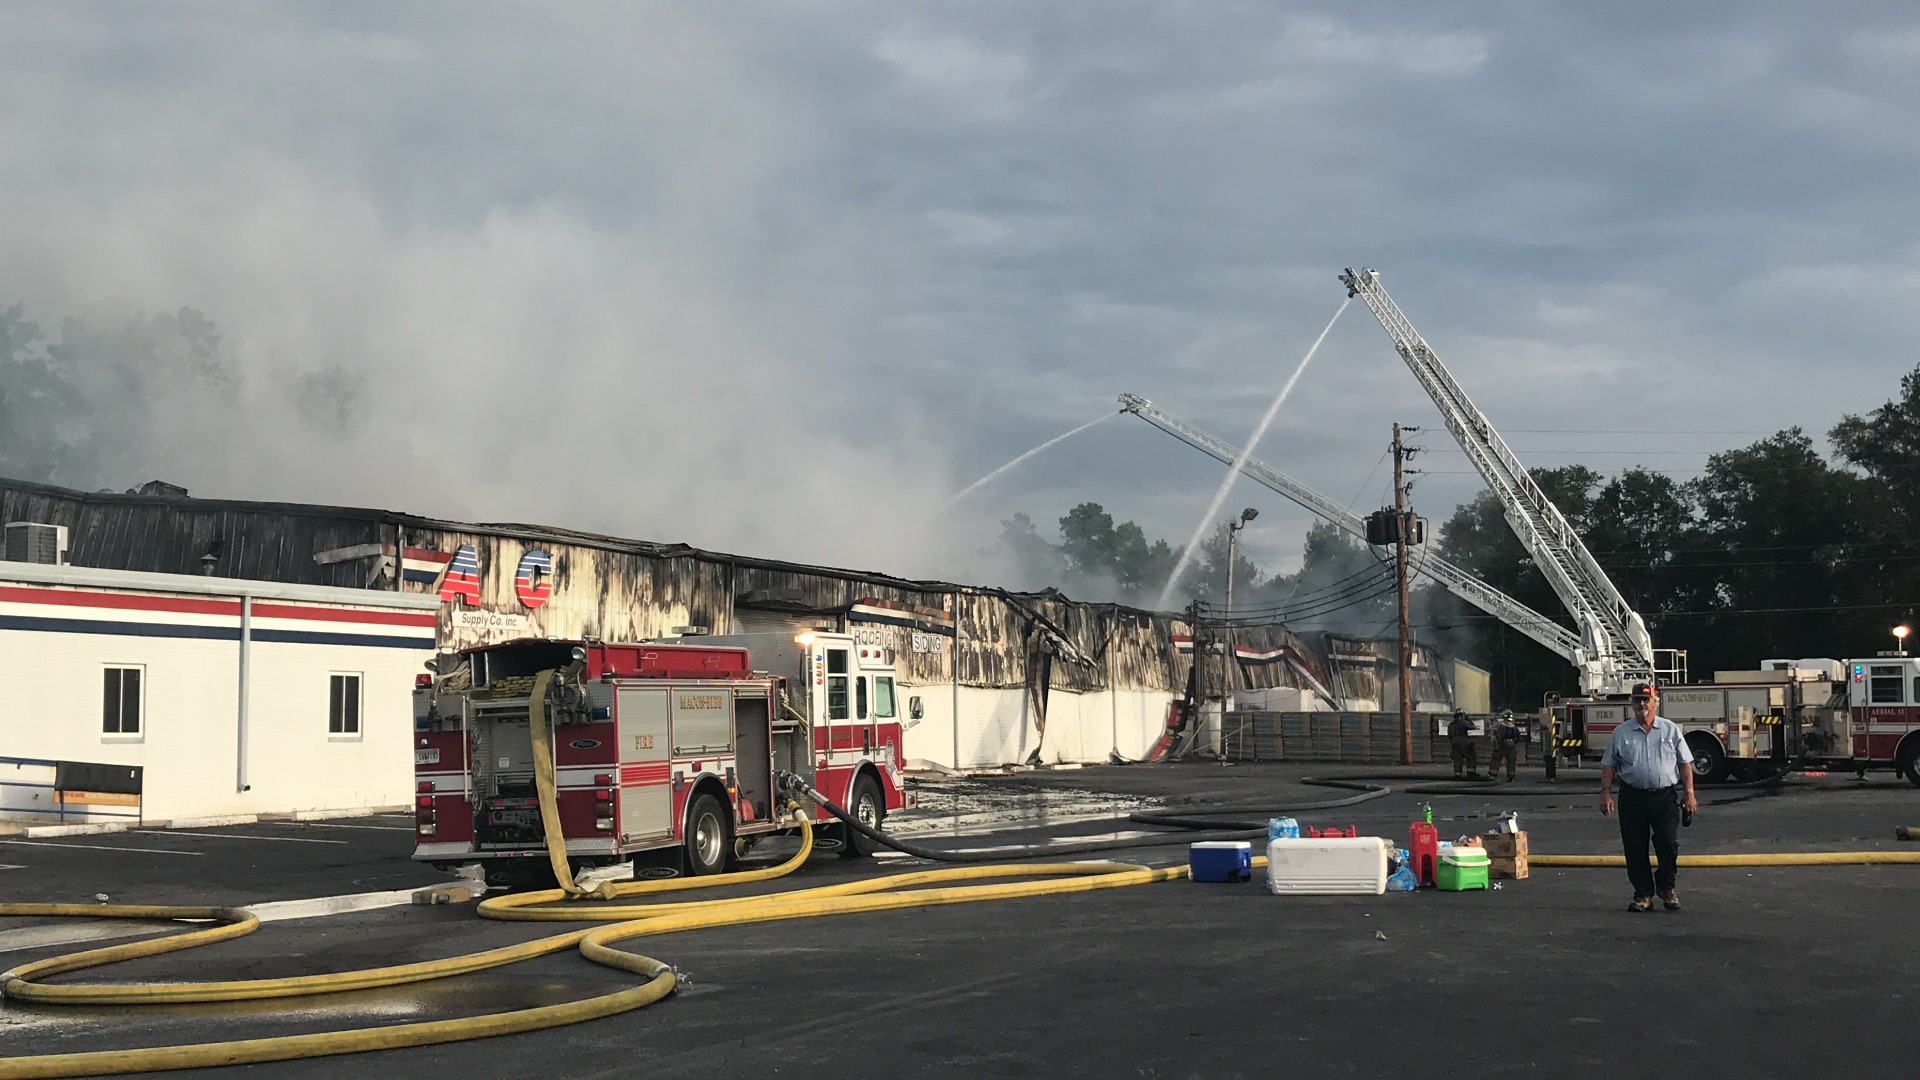 The warehouse caught on fire around 5:30 p.m. Friday. The fire was still burning Saturday morning and investigators are searching for the cause.